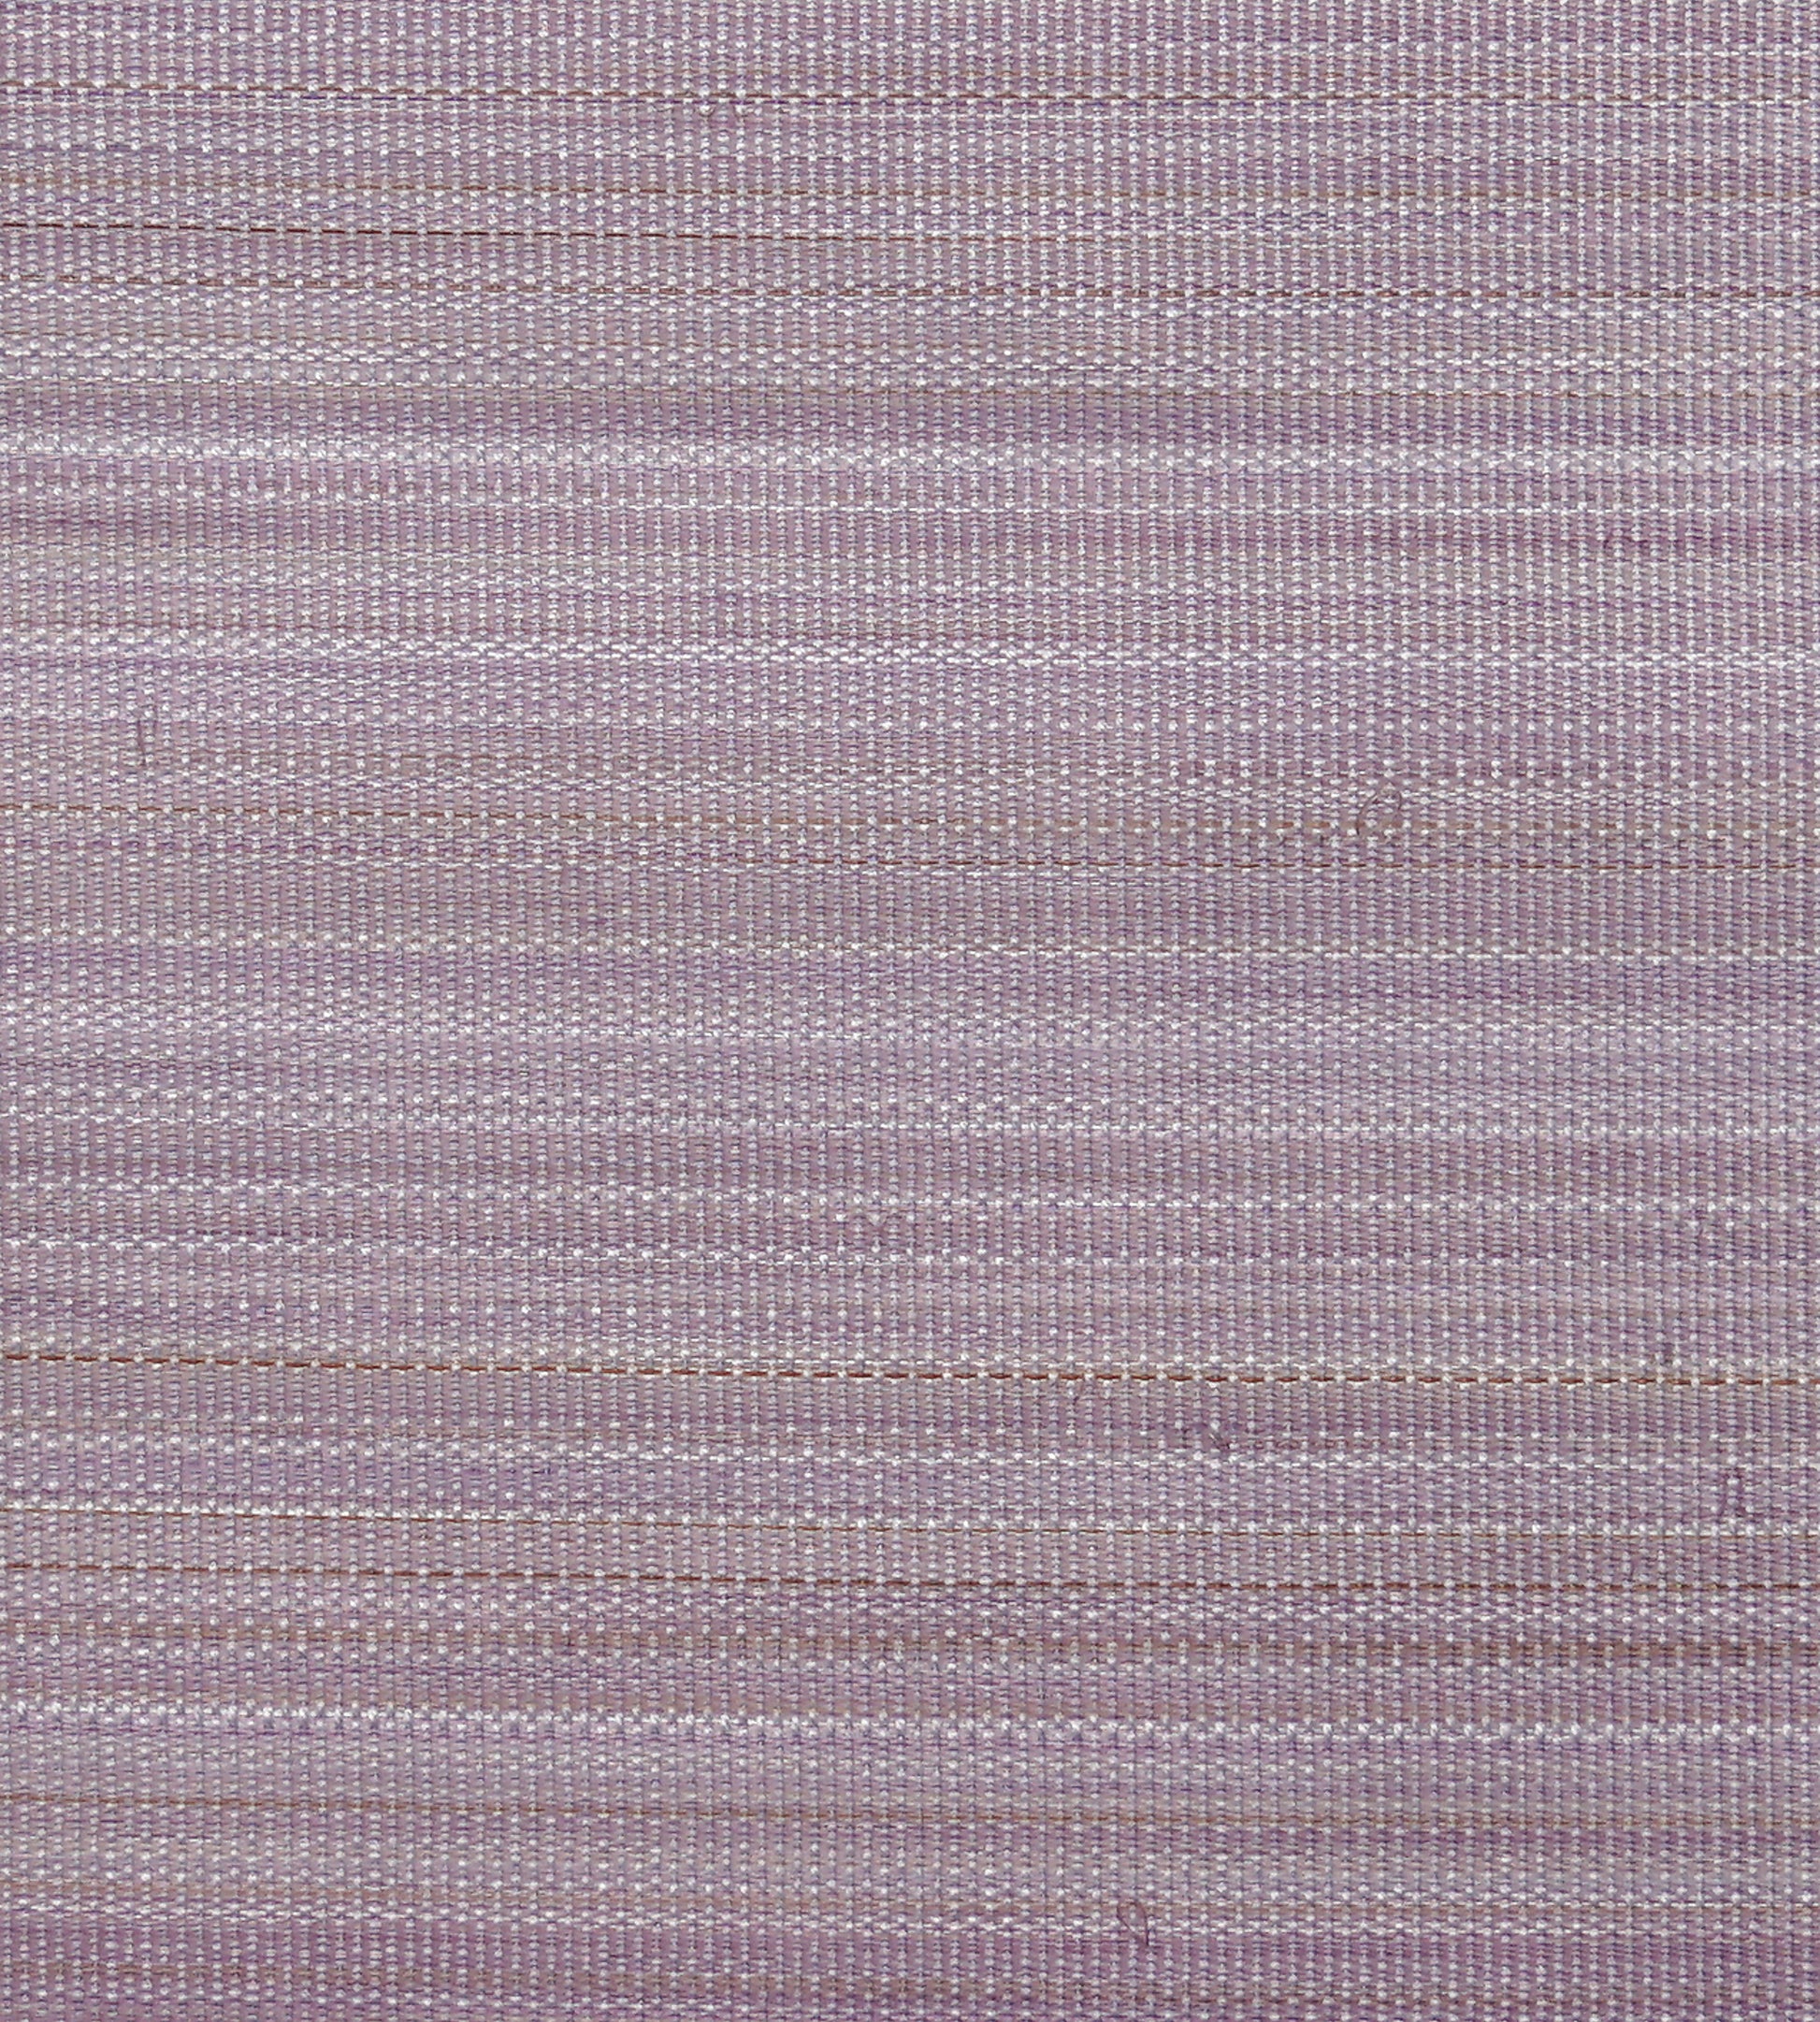 Purchase Old World Weavers Fabric Pattern SK 05400001, Paso Horsehair Violet 1